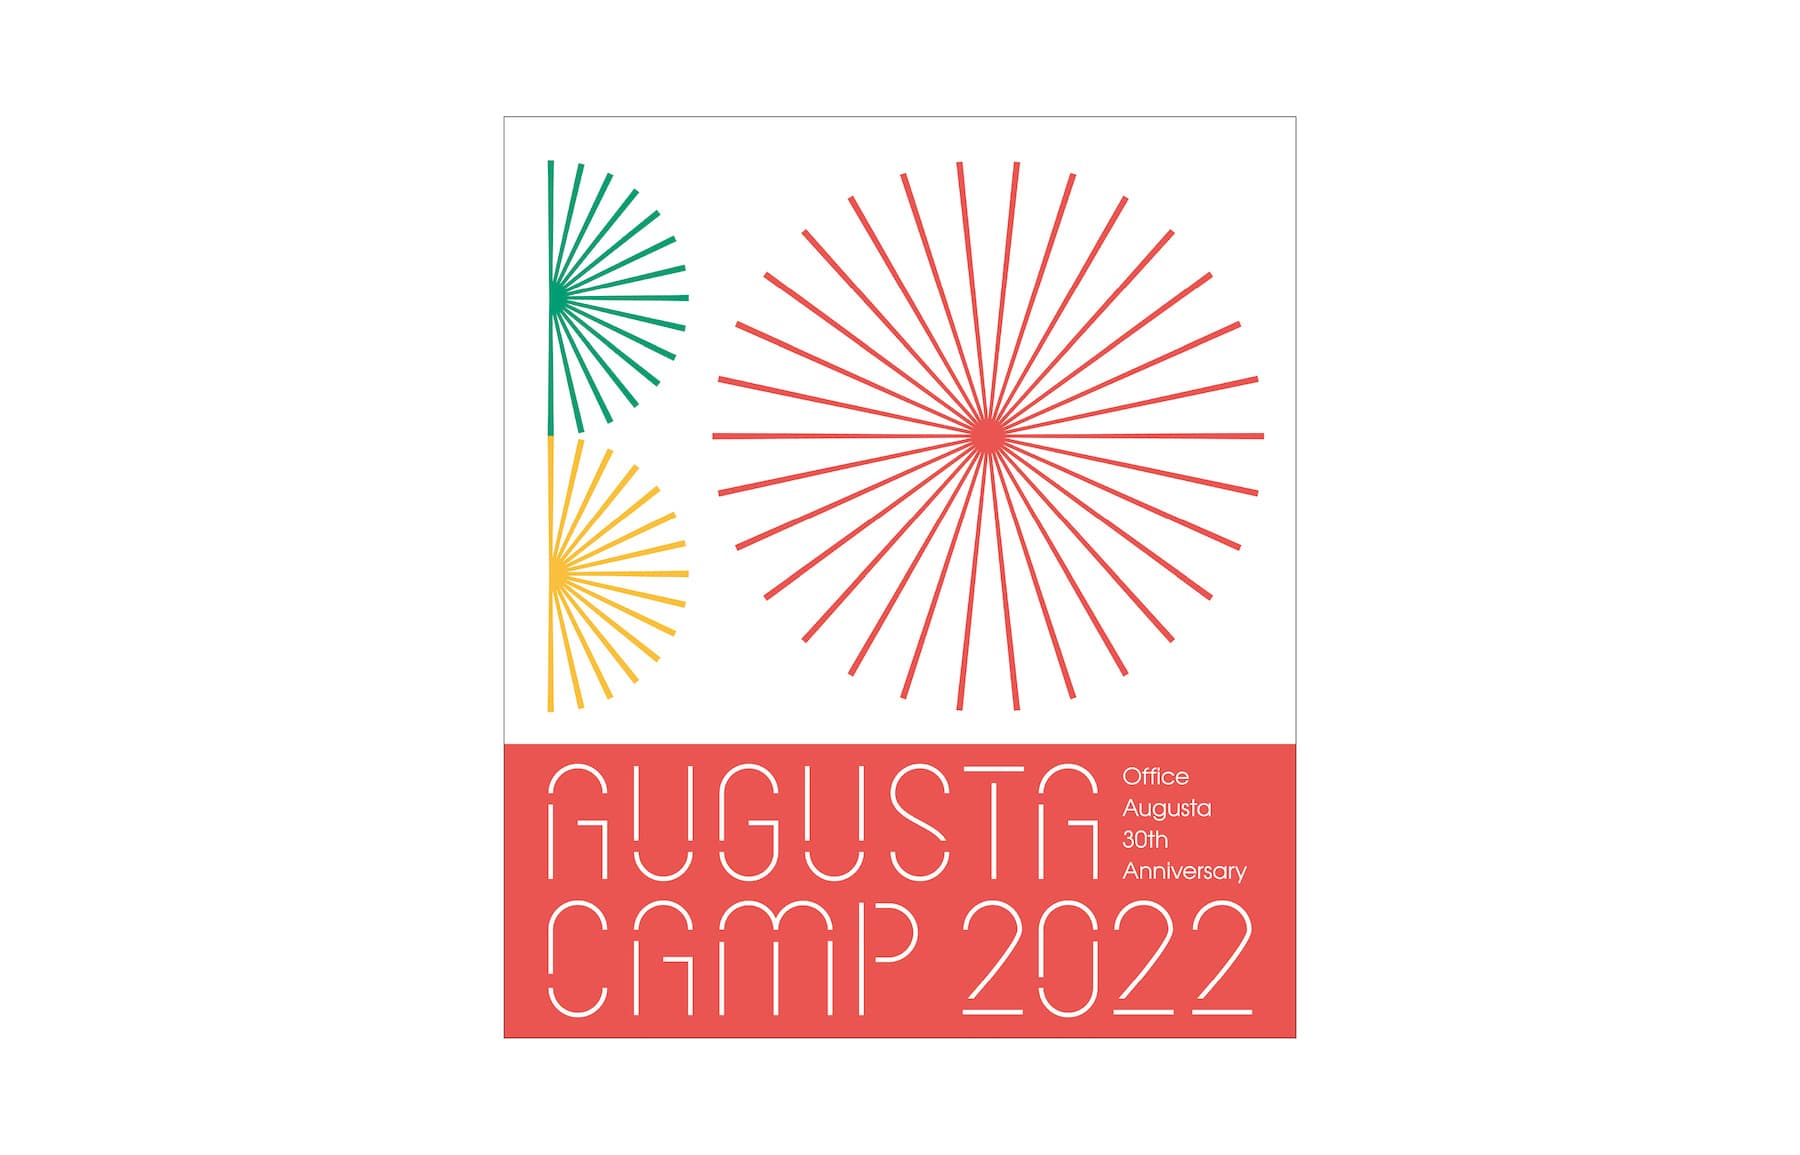 Live Blu-ray “Augusta Camp 2021” will be sold at the Augusta Camp venue!Privilege party information too!